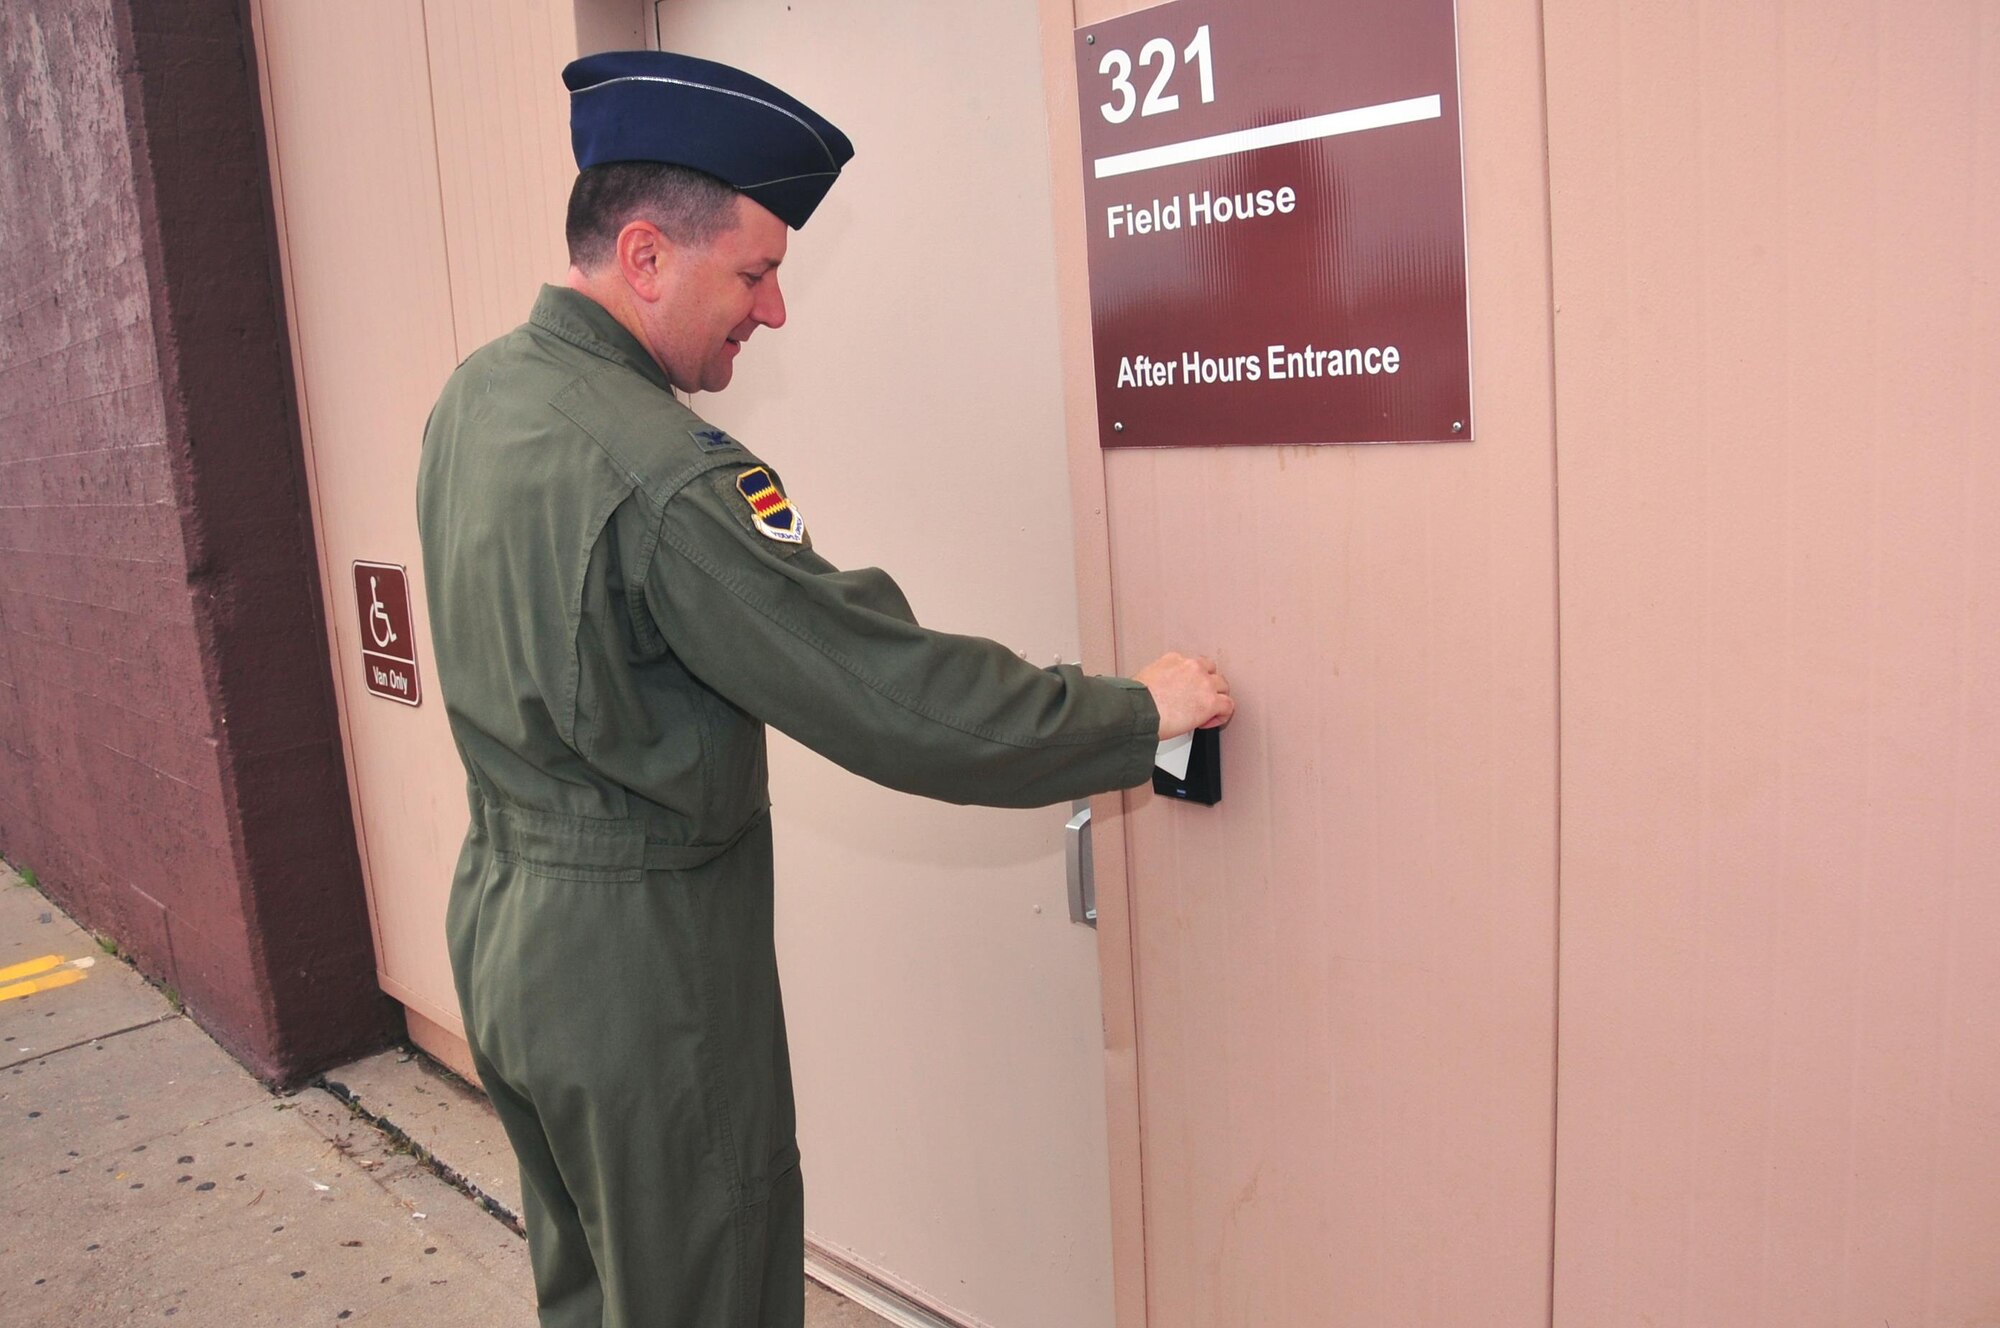 U.S. Air Force Col. Marty Reynolds, commander of the 55th Wing, uses his newly enabled common access card to enter the after-hours field house gym at Offutt Air Force Base, Neb., July 7, 2016.  Airmen will now have round-the-clock access to the fitness facility.  (U.S. Air Force photo by D.P. Heard/Released)